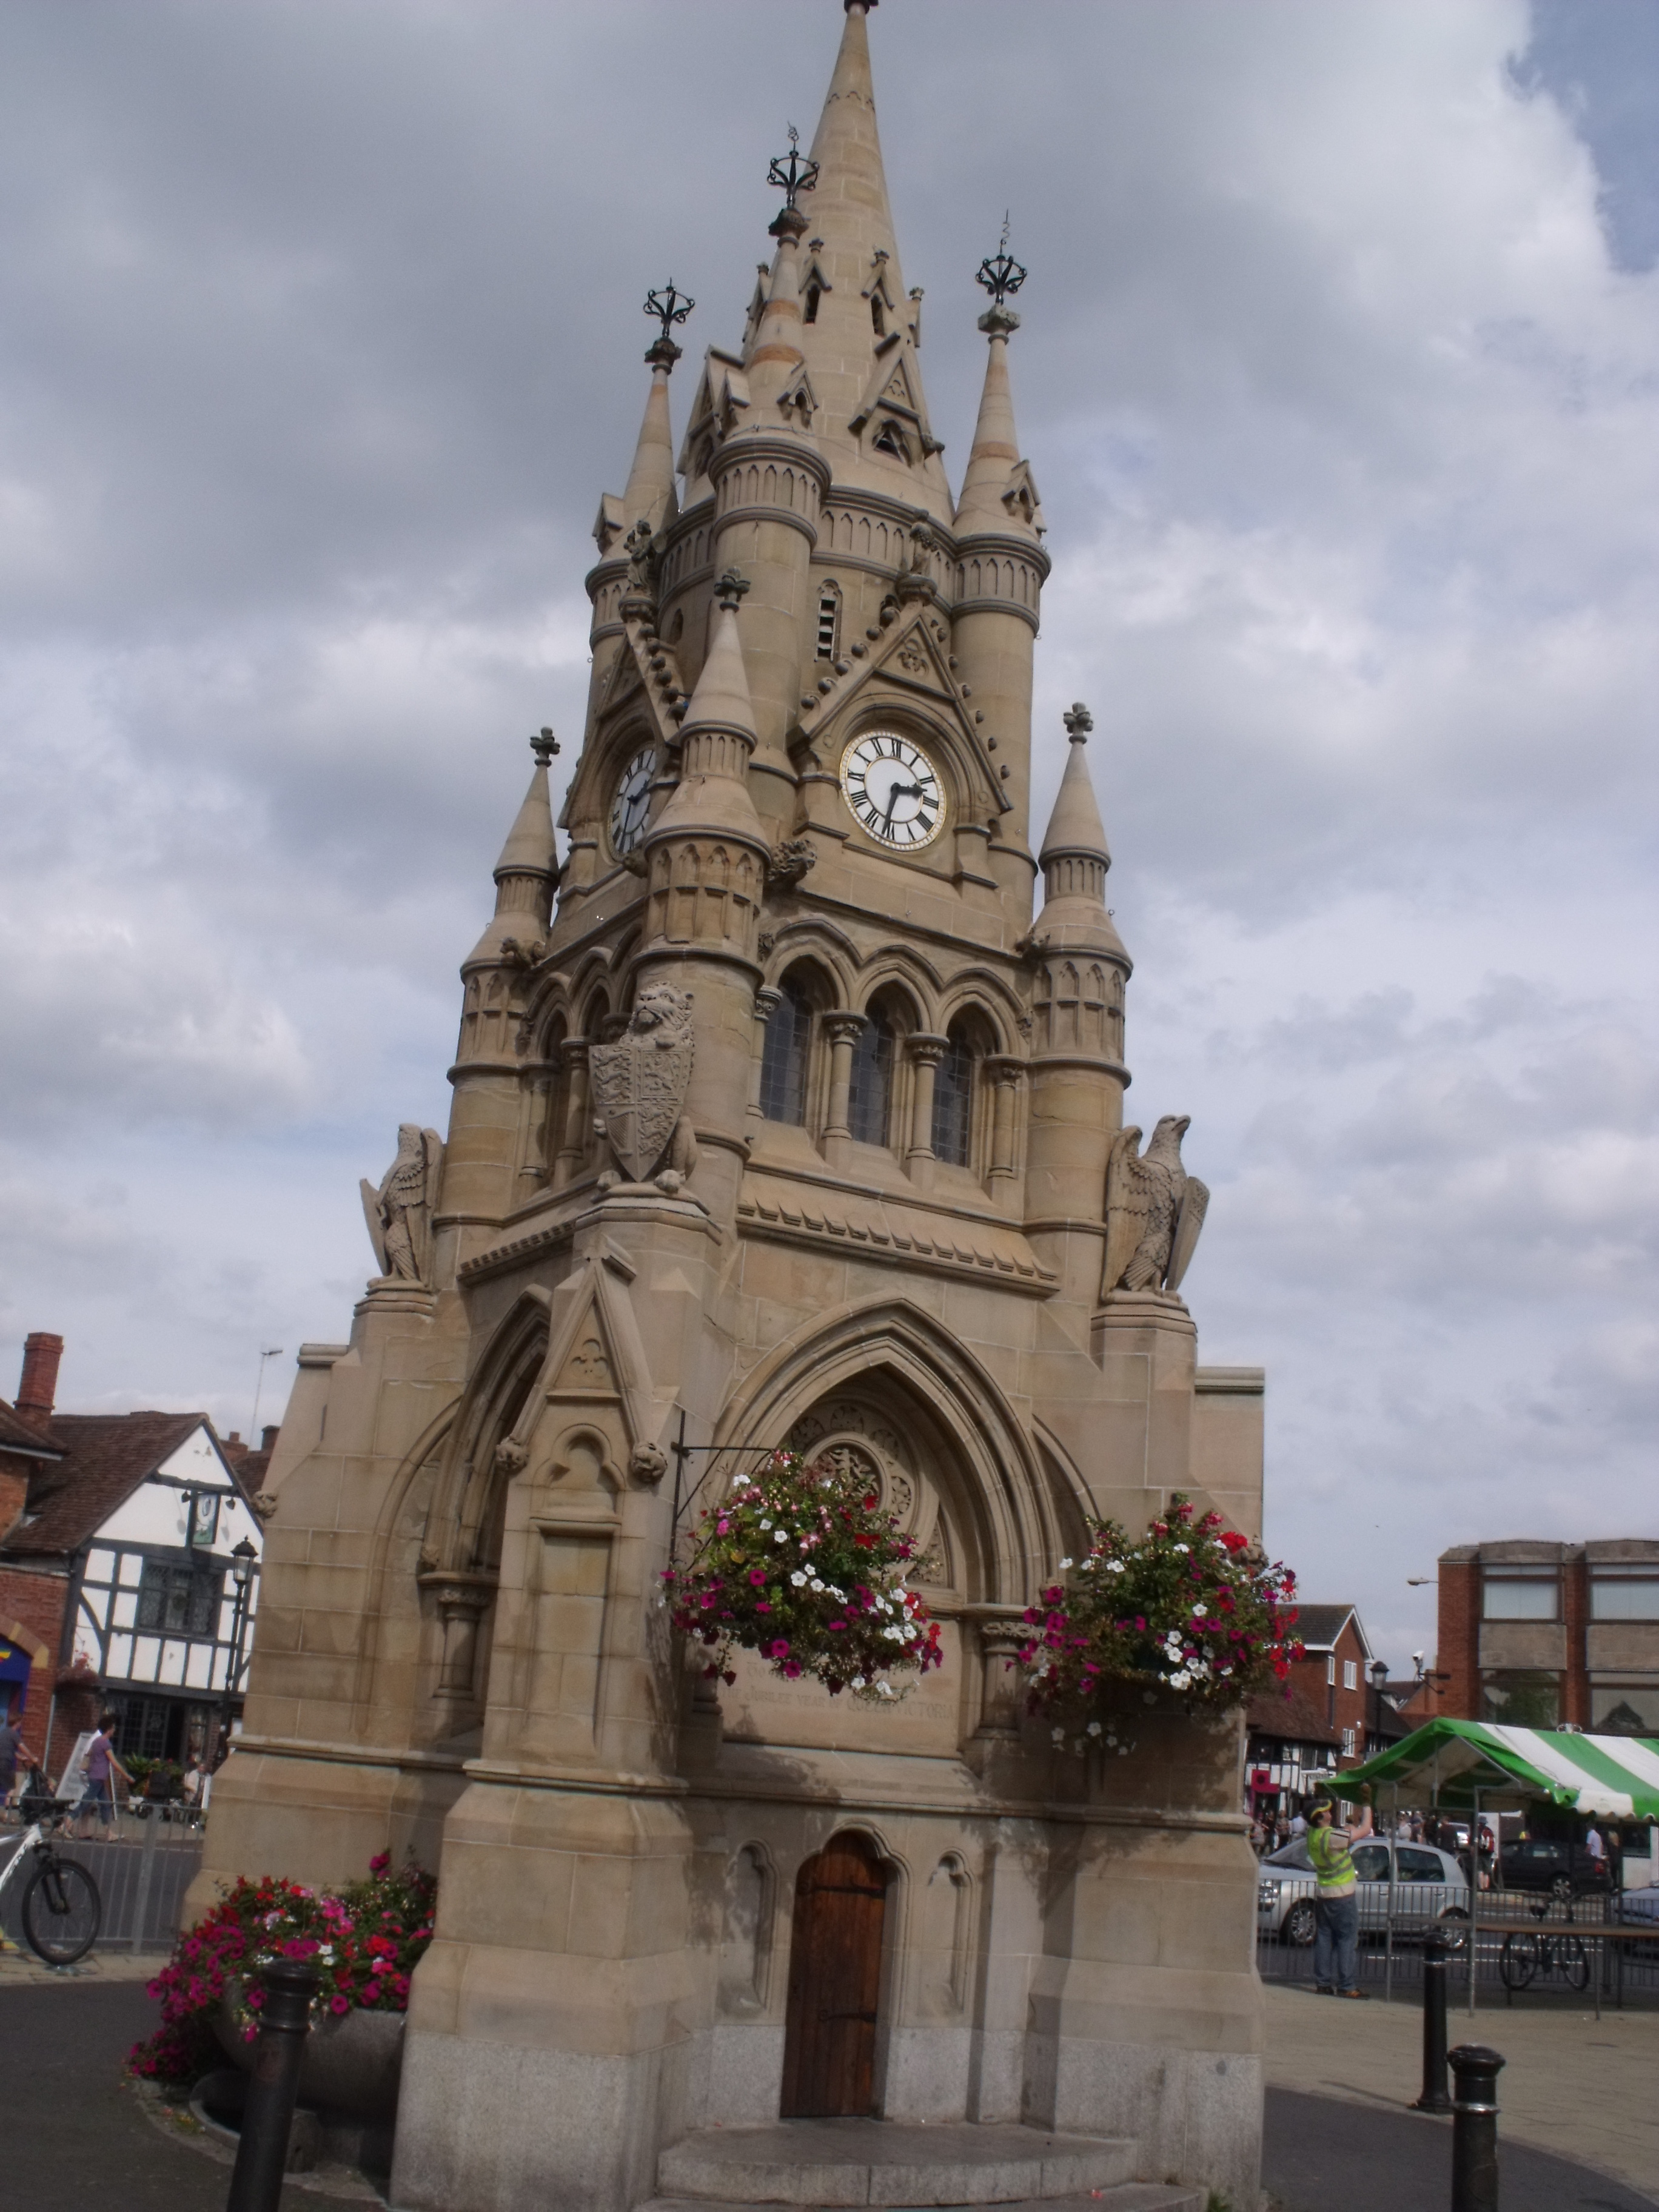 The American Fountain, Market Place, Stratford-upon-Avon